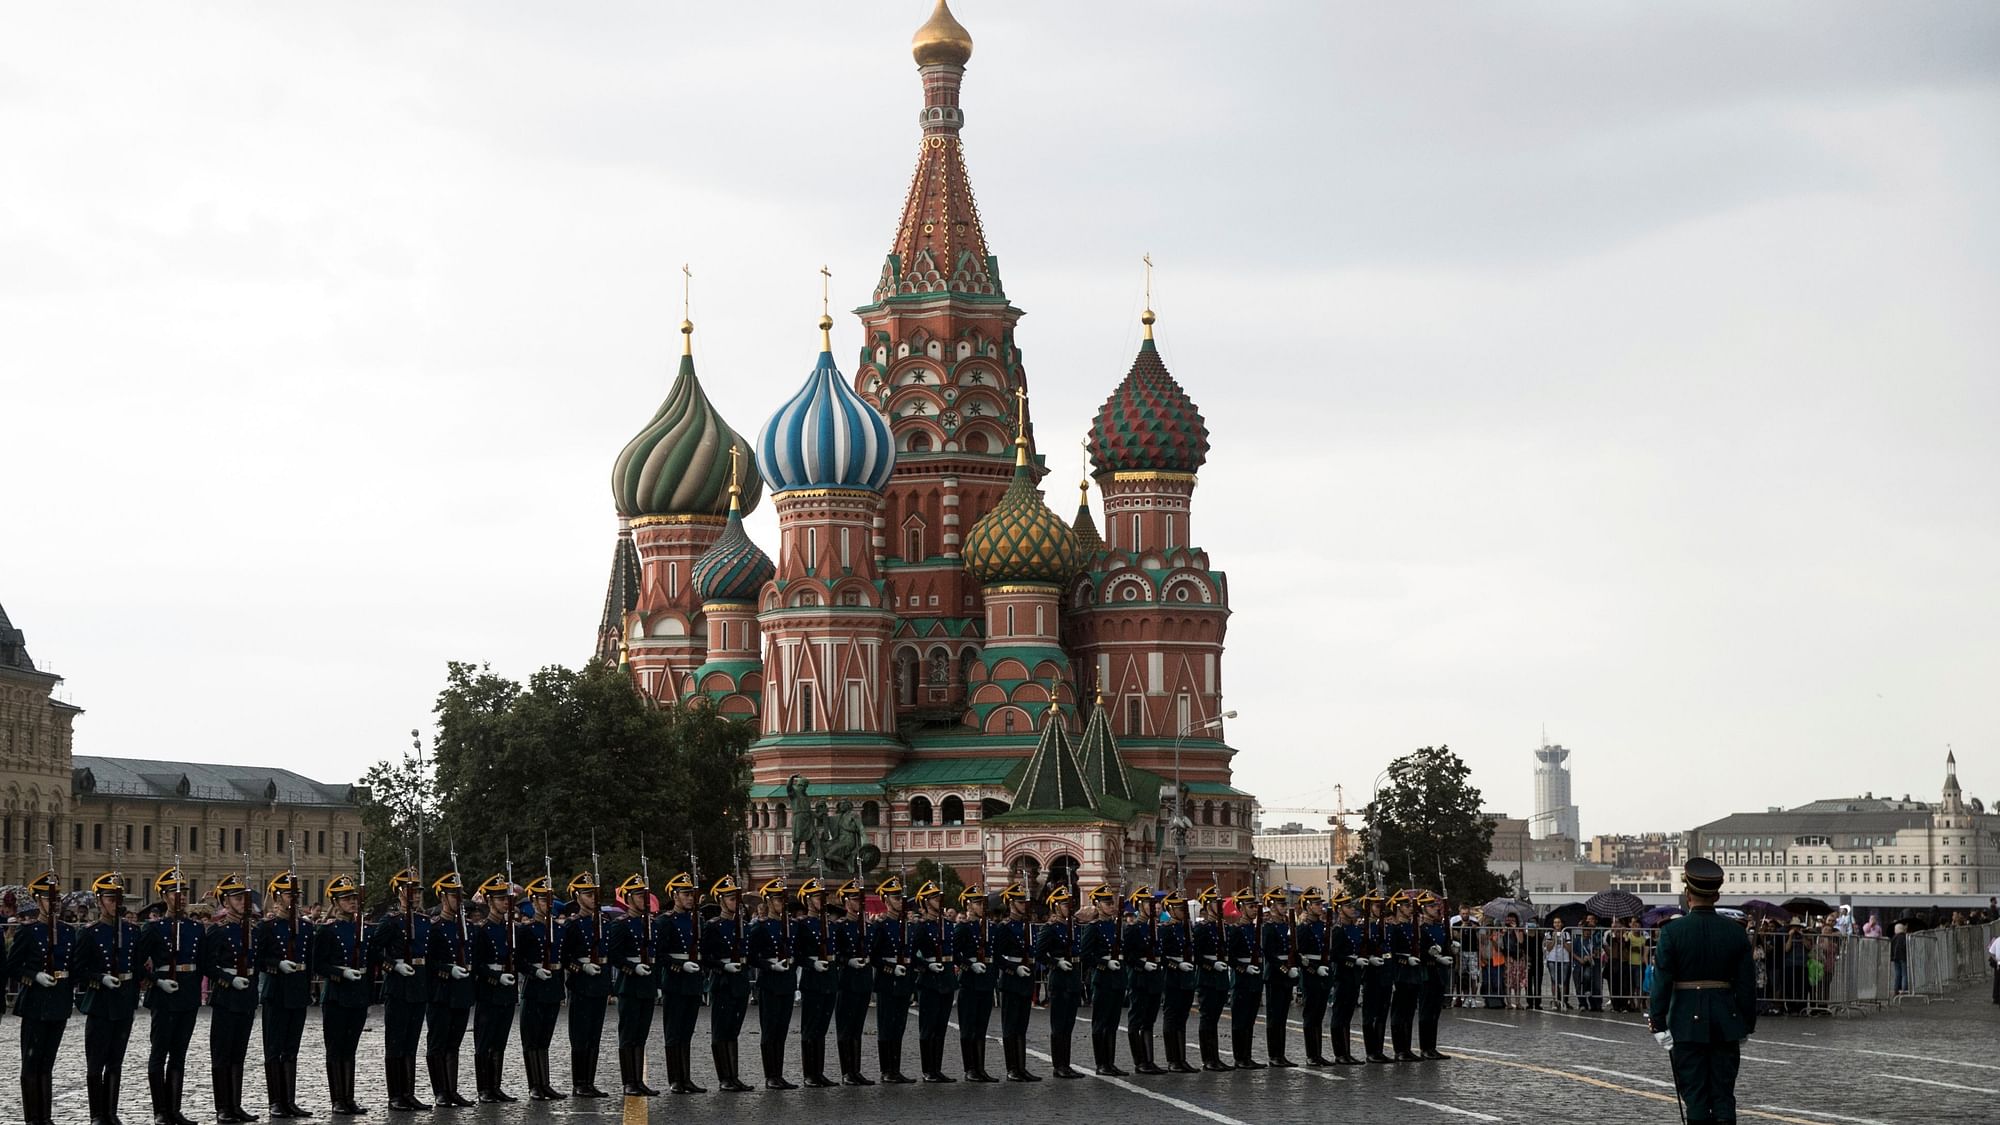 In this June 30, 2018, file photo, Kremlin guards perform in Red Square with St. Basil’s Cathedral in the background in Moscow, Russia. For representative purposes only.